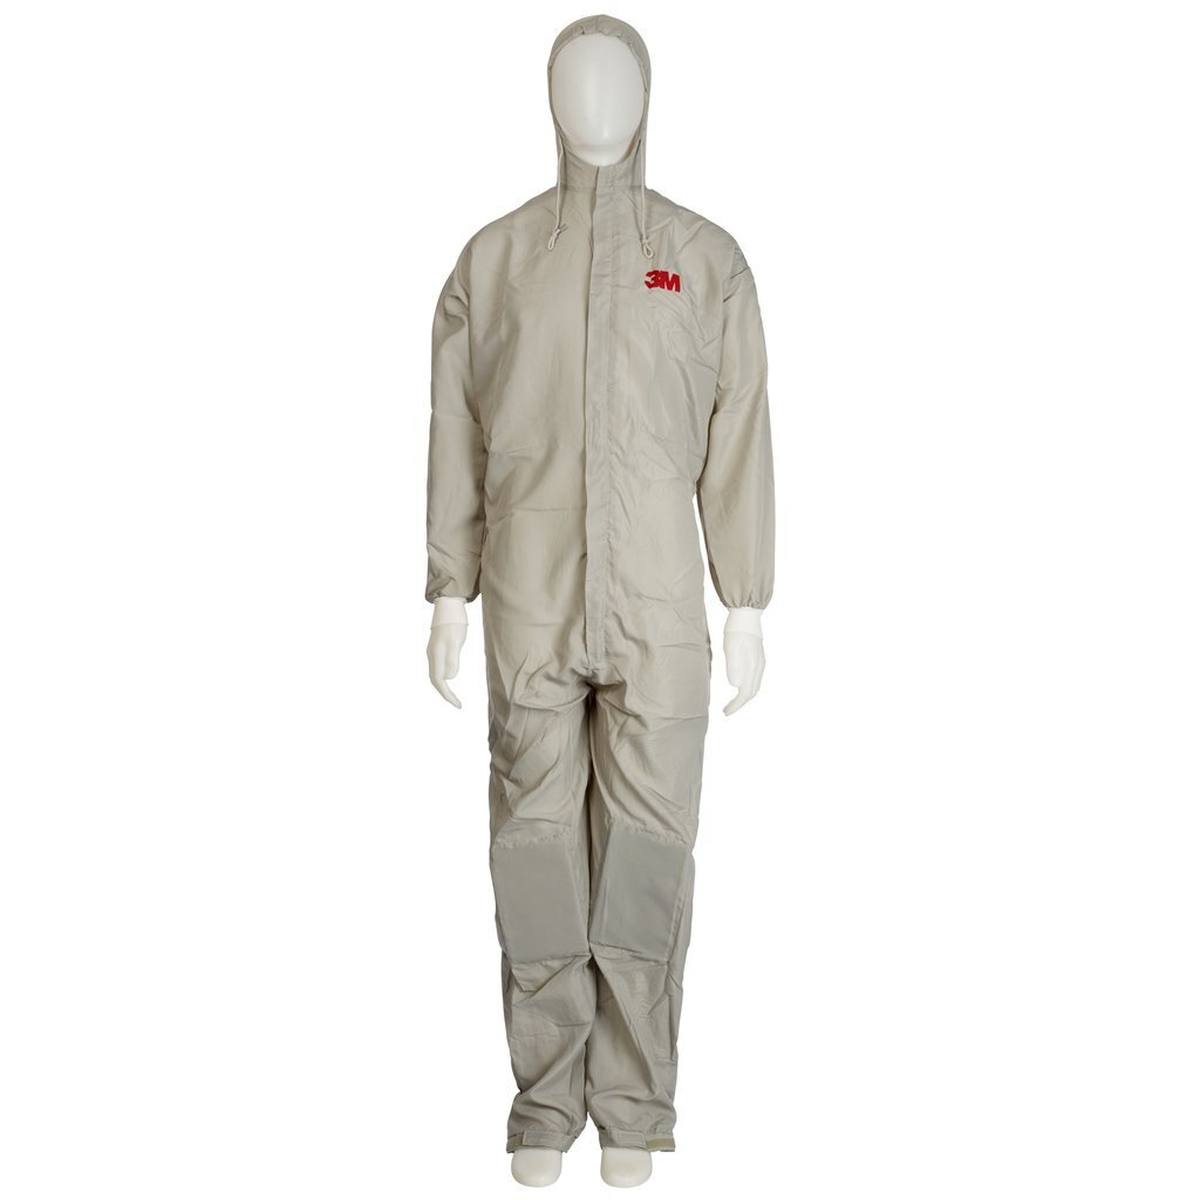 3M 50425 Protective coverall, size L, breathable, knee pads, trouser pockets, material lightweight polyester fabric, side trouser pockets, openings in the back for heat dissipation